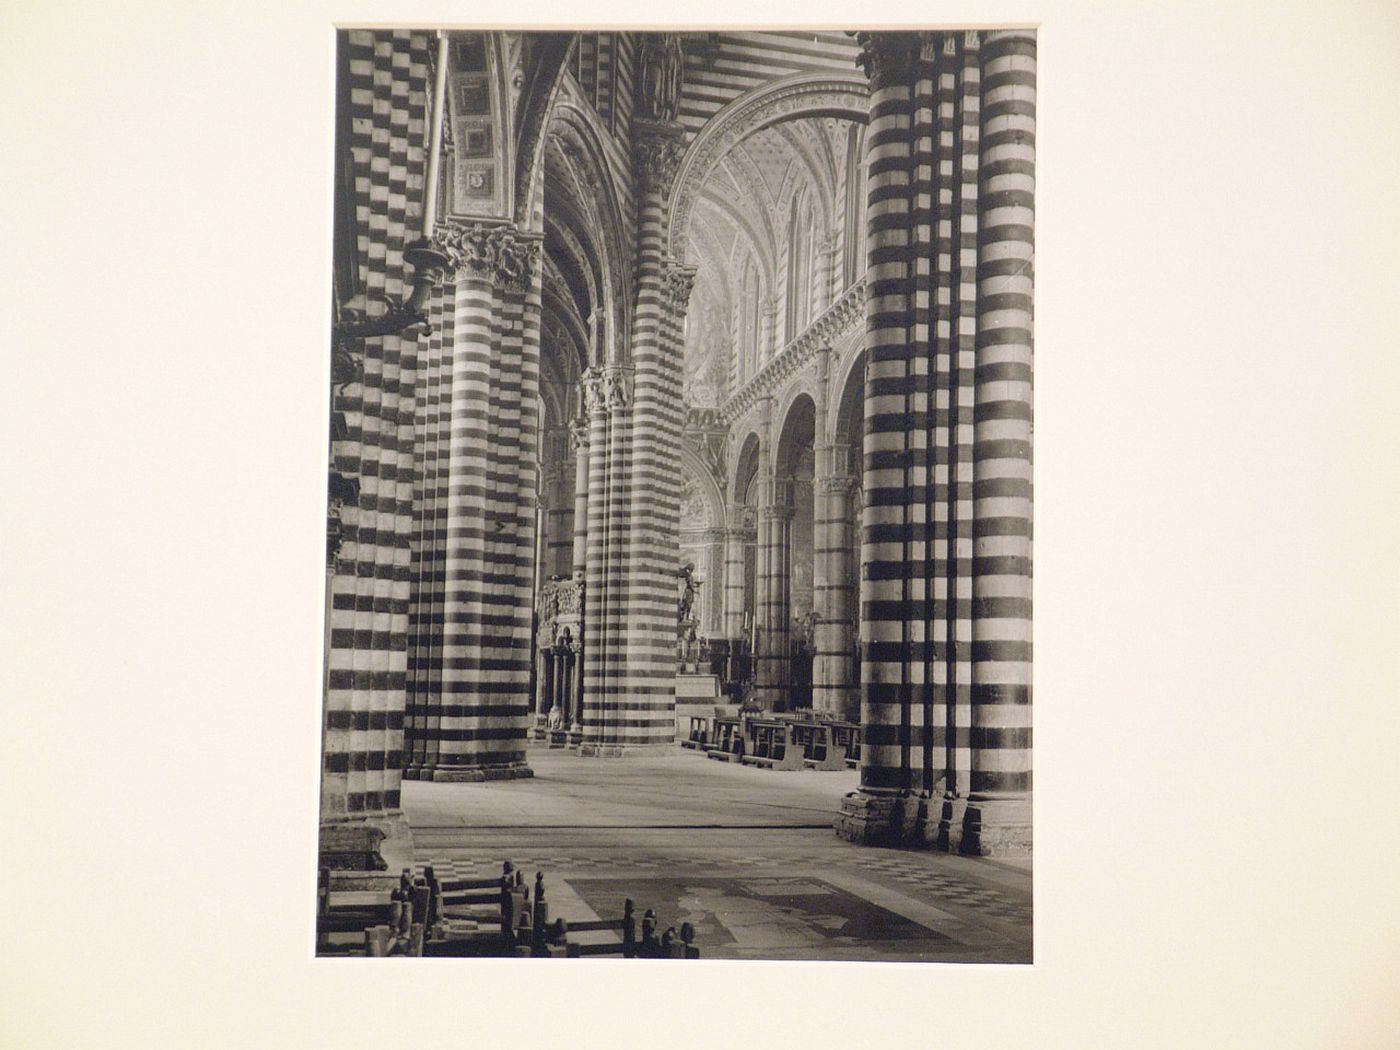 Interior of cathedral, detail of piers with horizontal stripes, possibly Siena, Italy